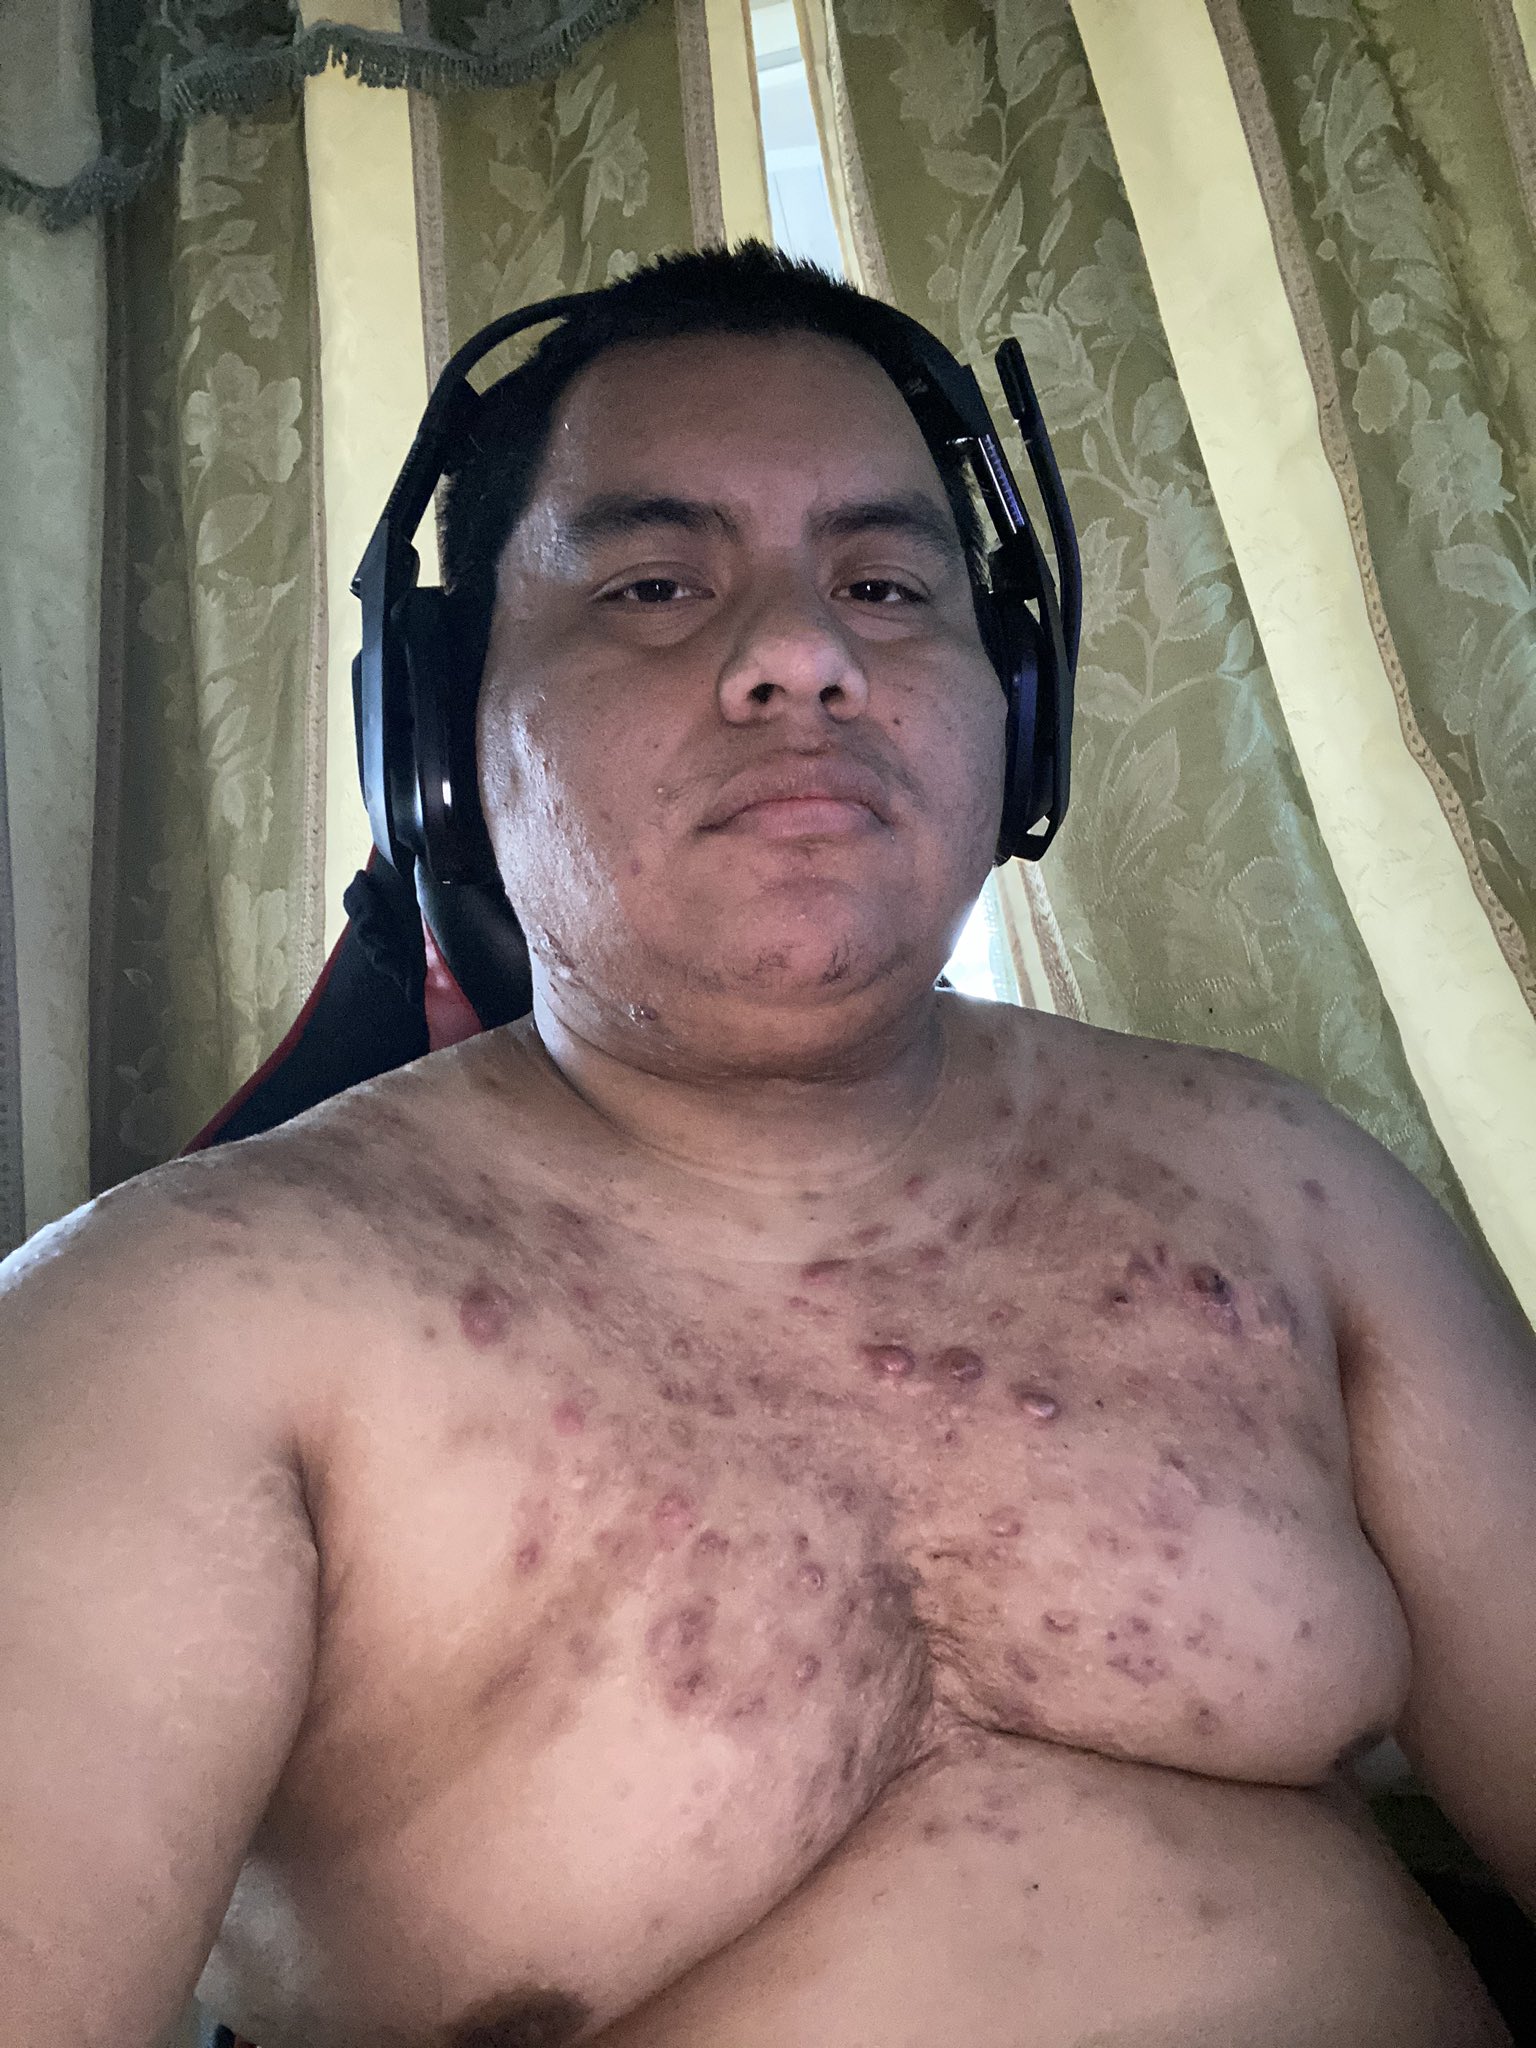 Mexican Andy on X: @pokimanelol I saw this cause someone liked it but here  https://t.co/7ofi02Ze6D / X